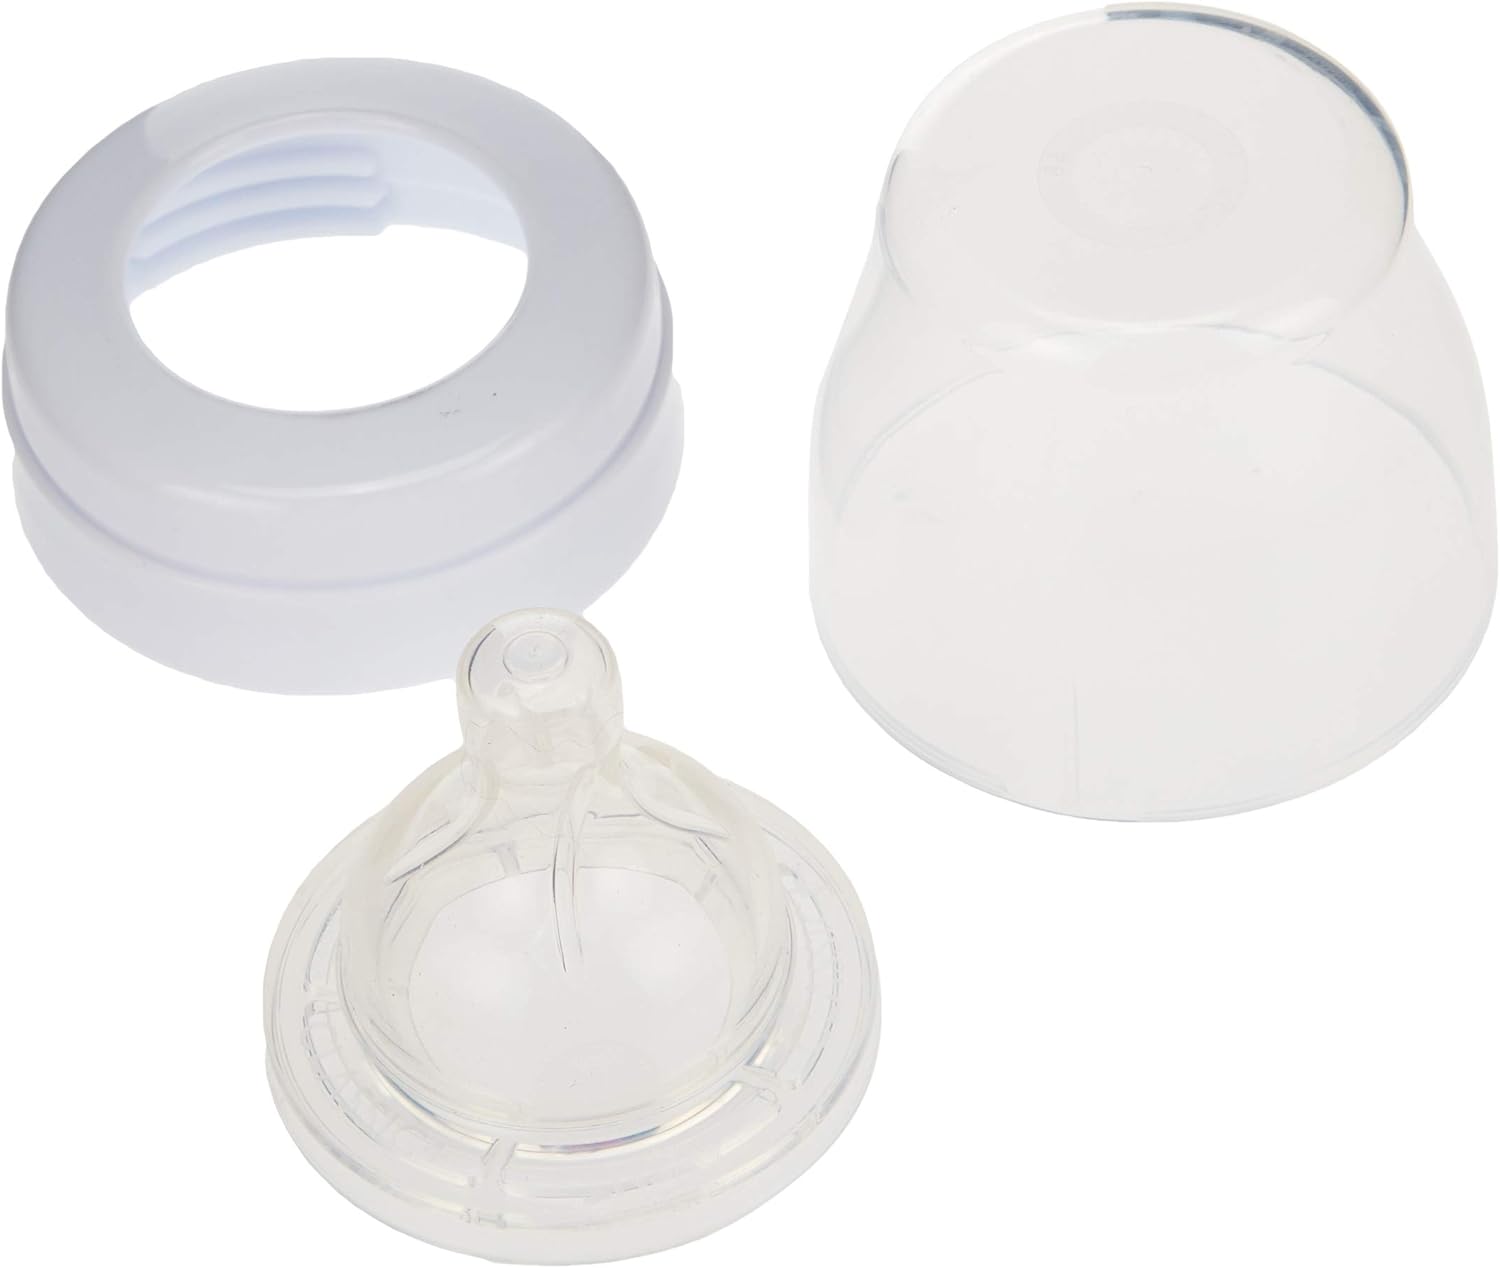 Philips Avent Anti Colic Feeding Bottle 260 Ml X 2 (Scf813/62) Visit the PHILIPS Store  4.5 4.5 out of 5 stars    158